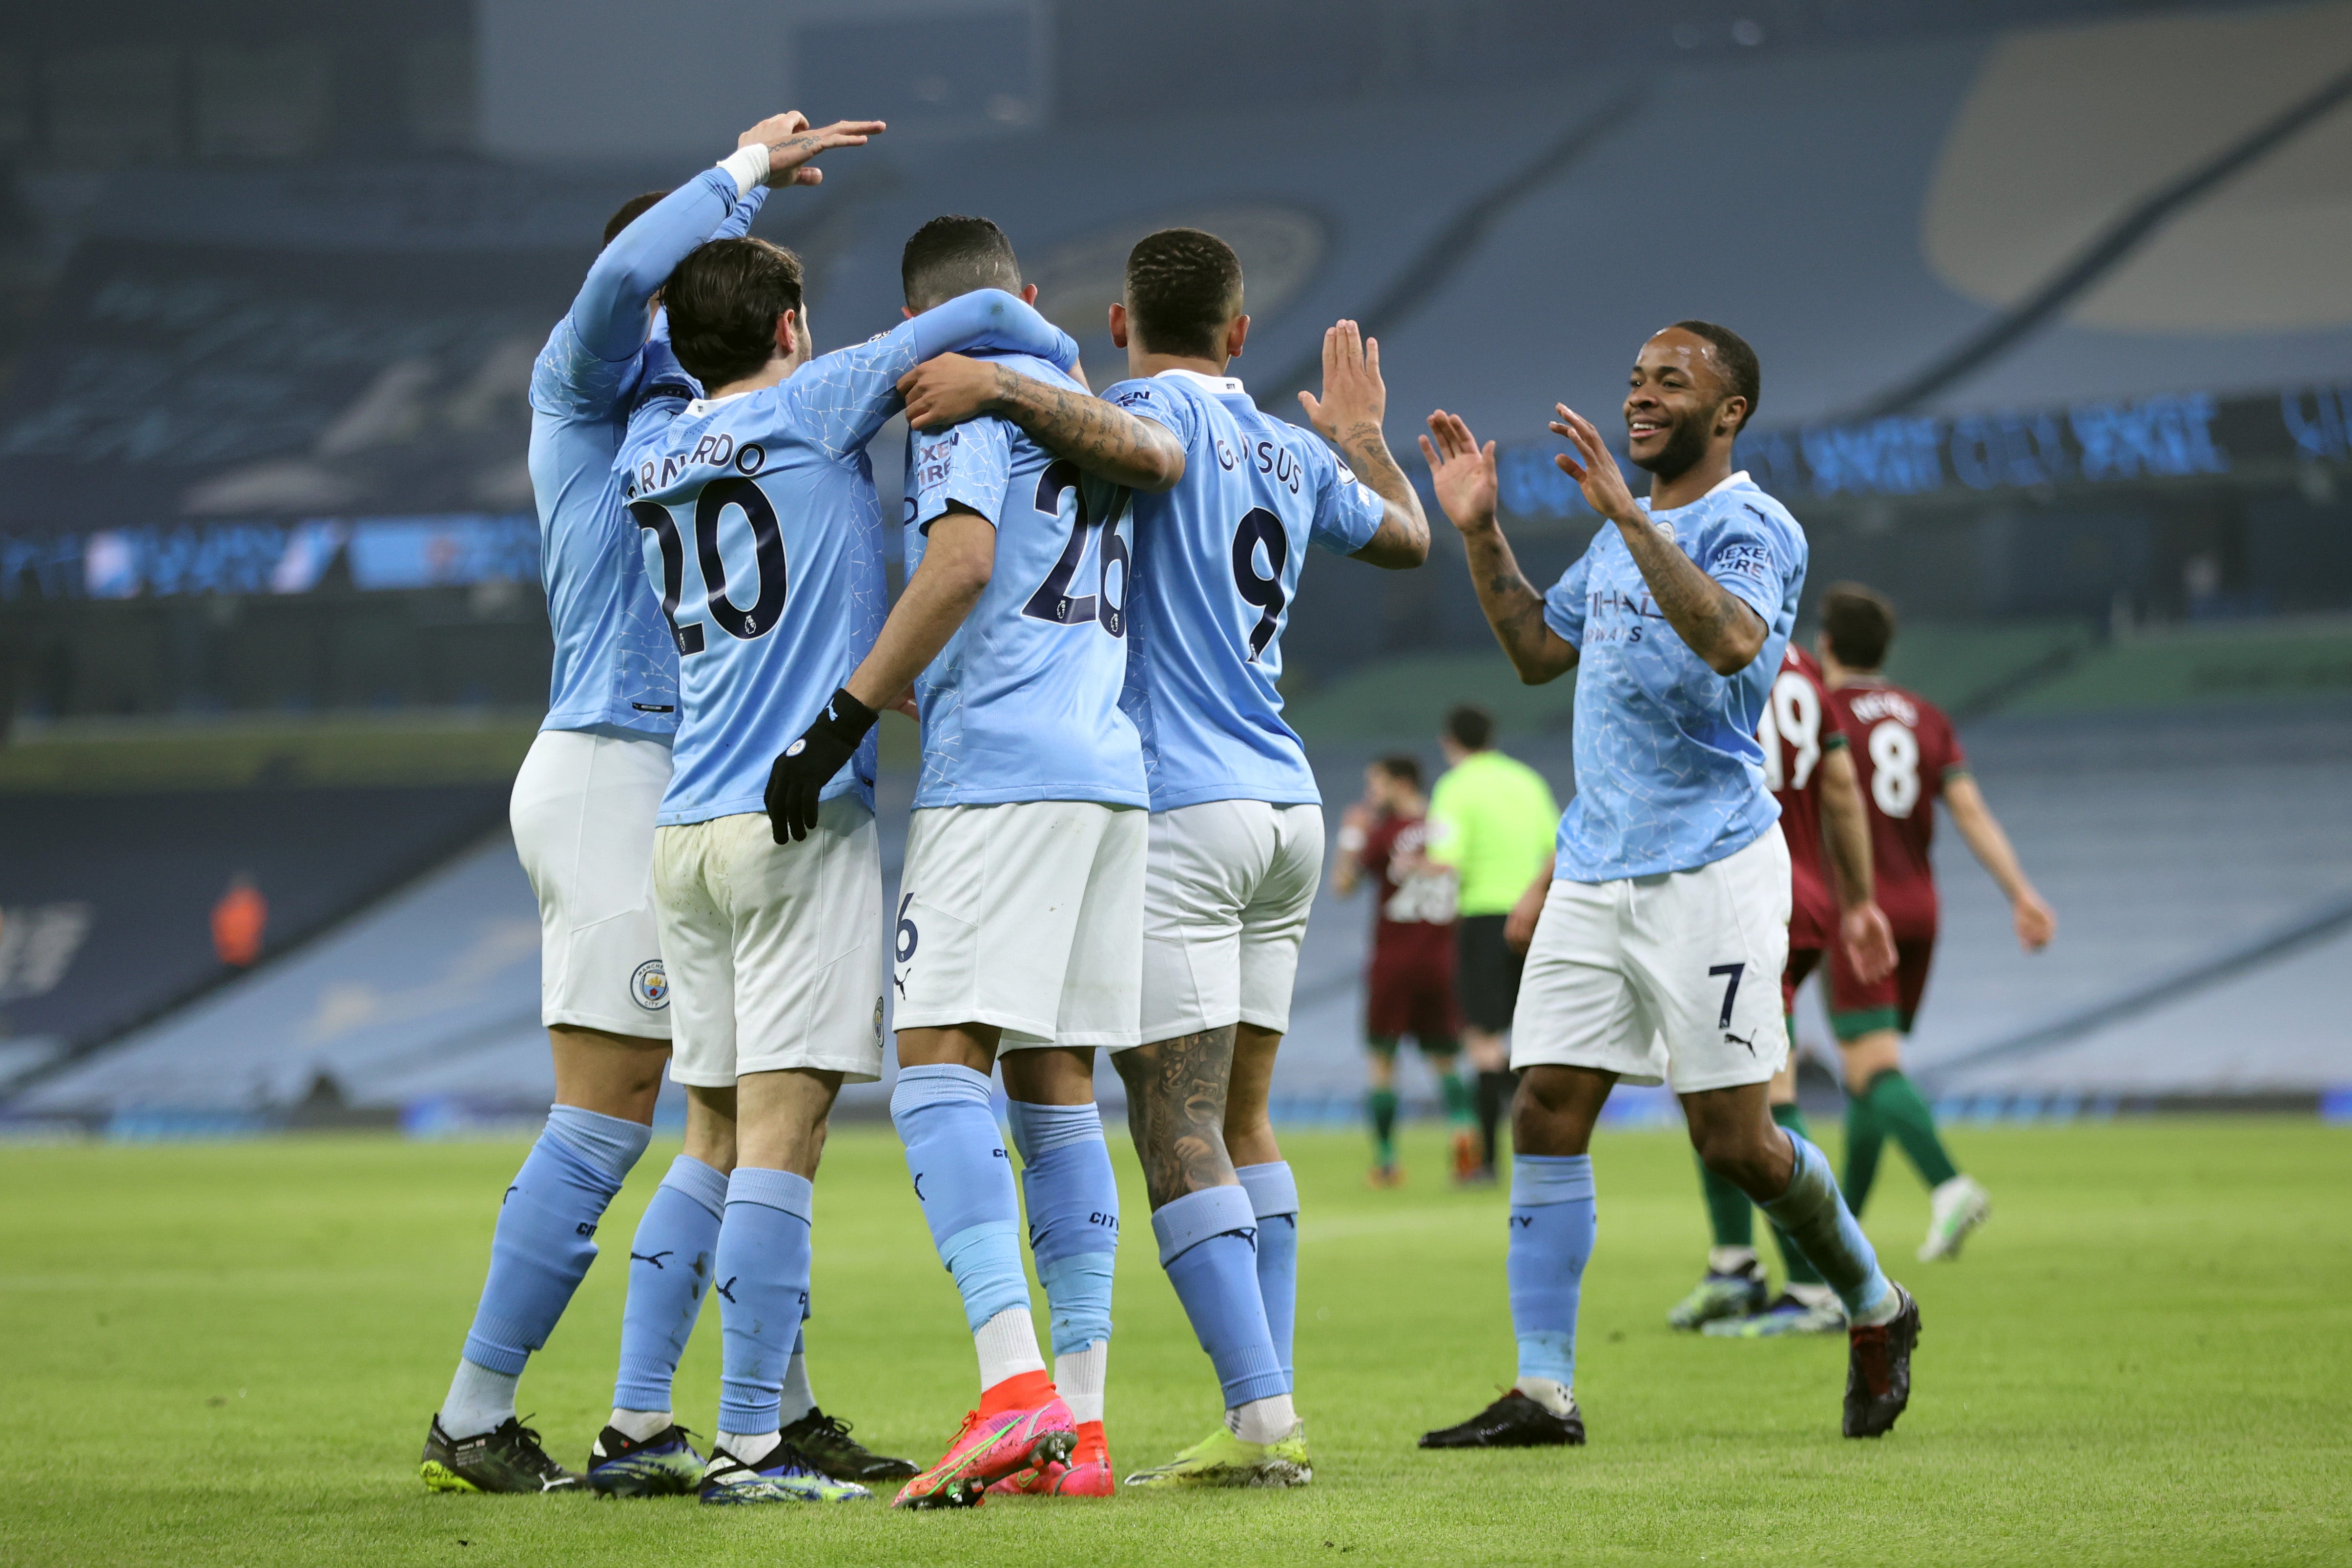 Manchester City have now won 21 consecutive games